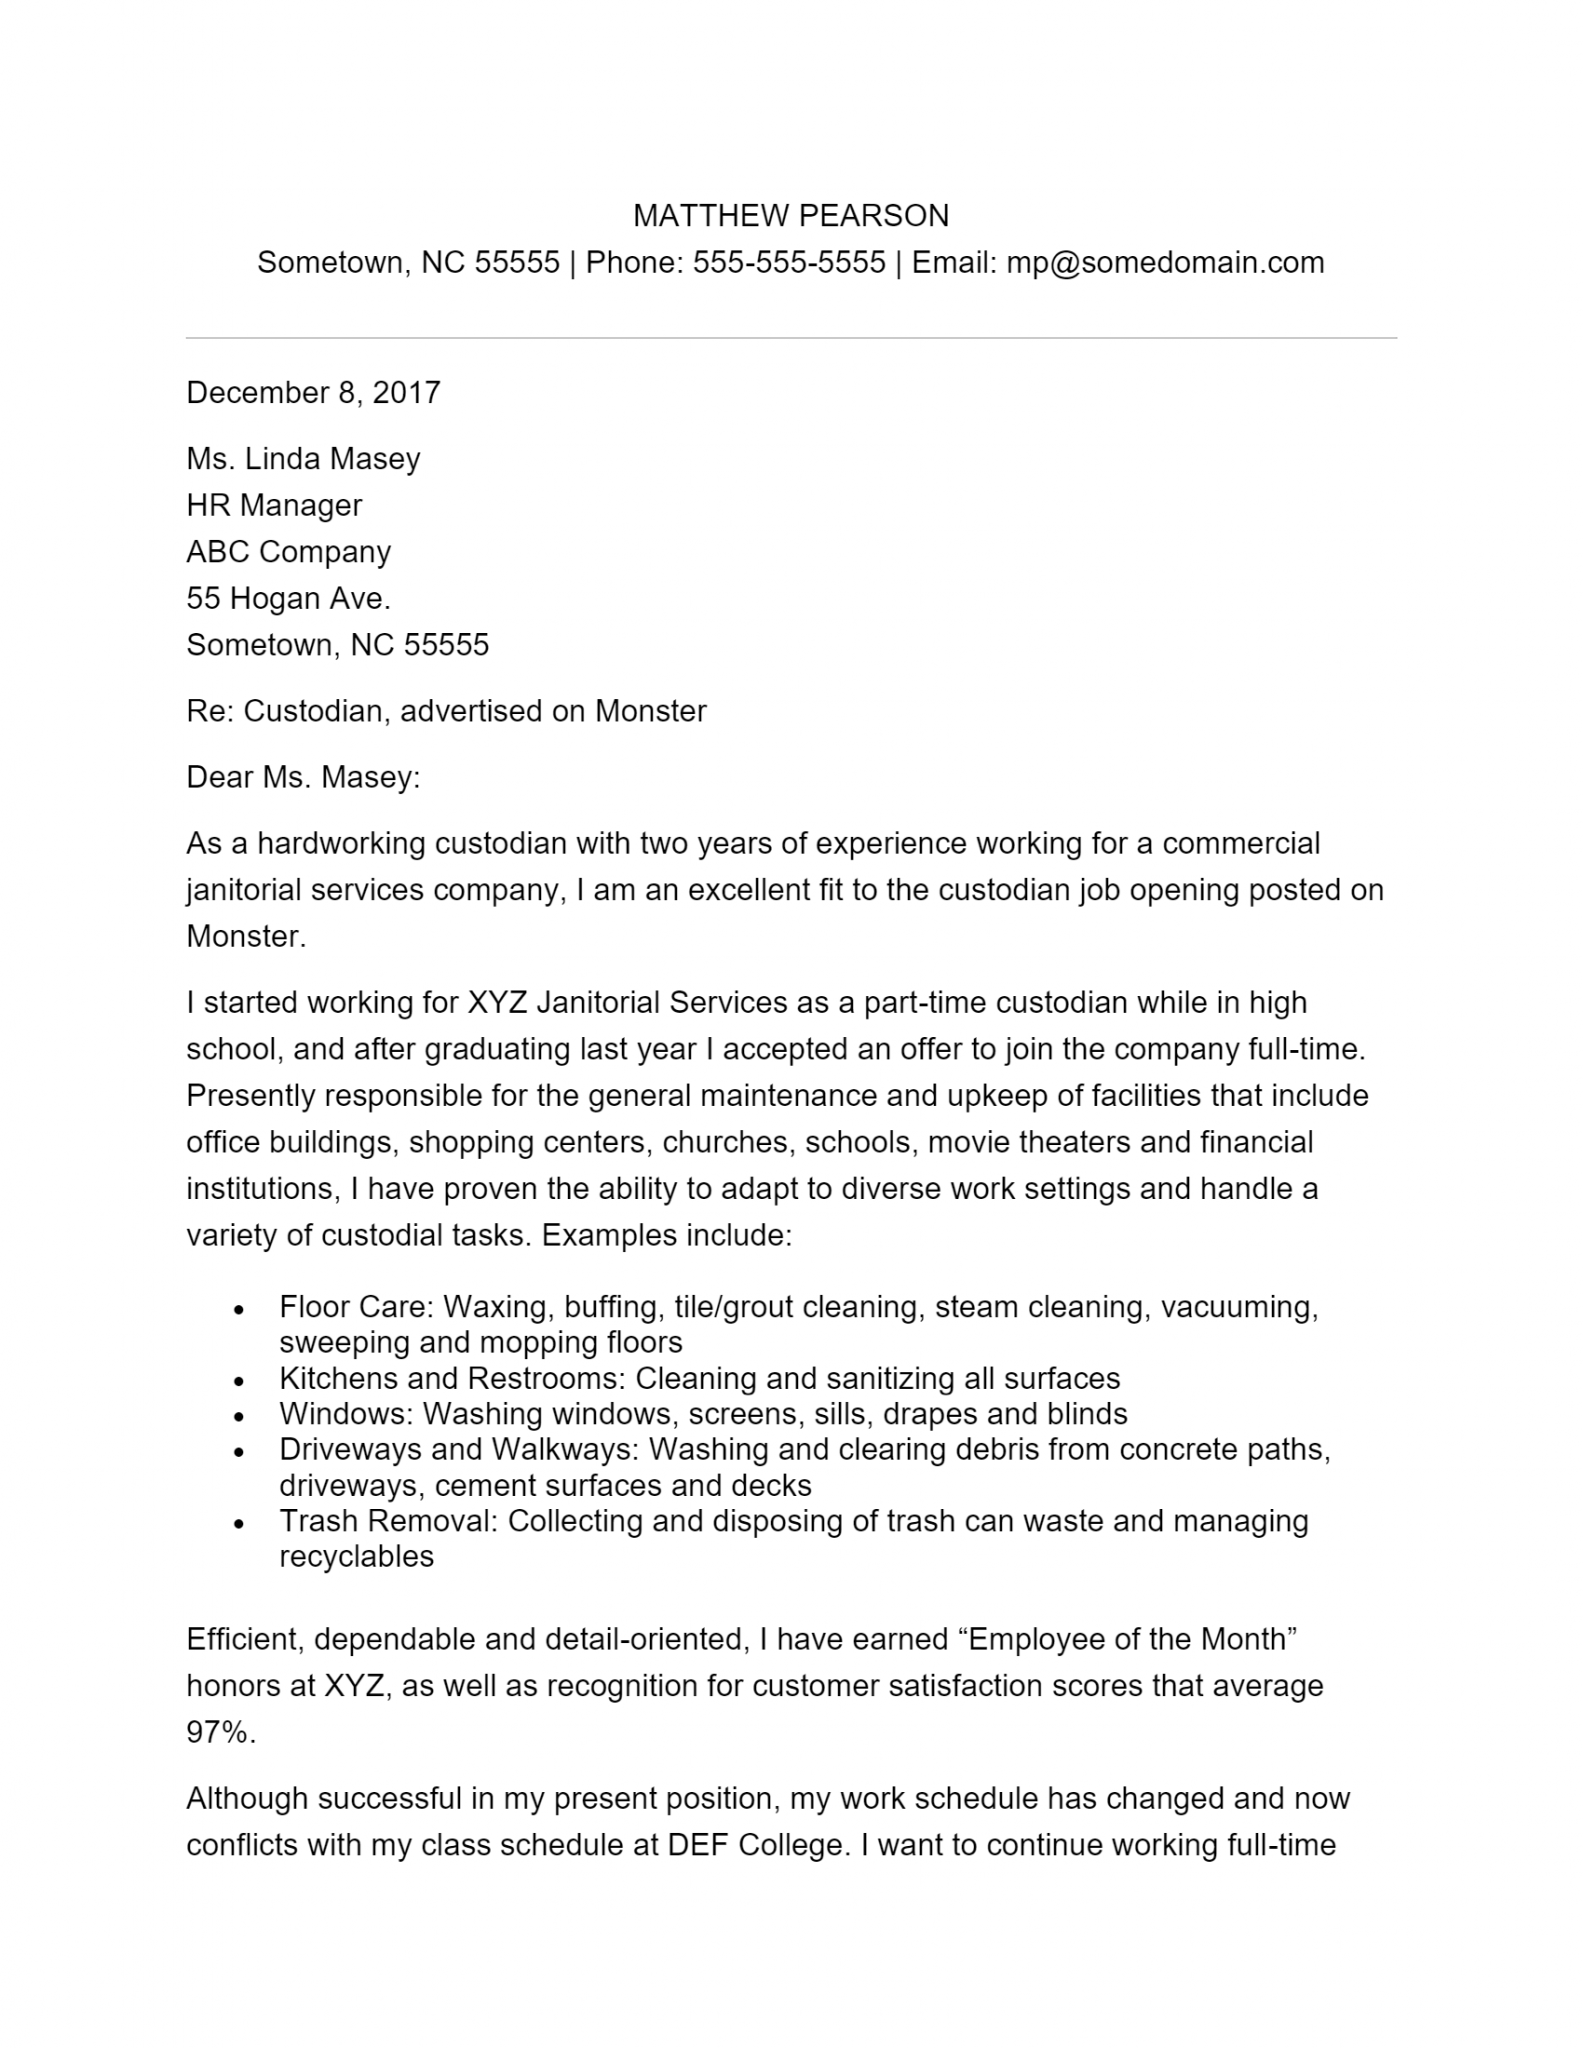 Free Custodian Cover Letter Template And Example On 2659